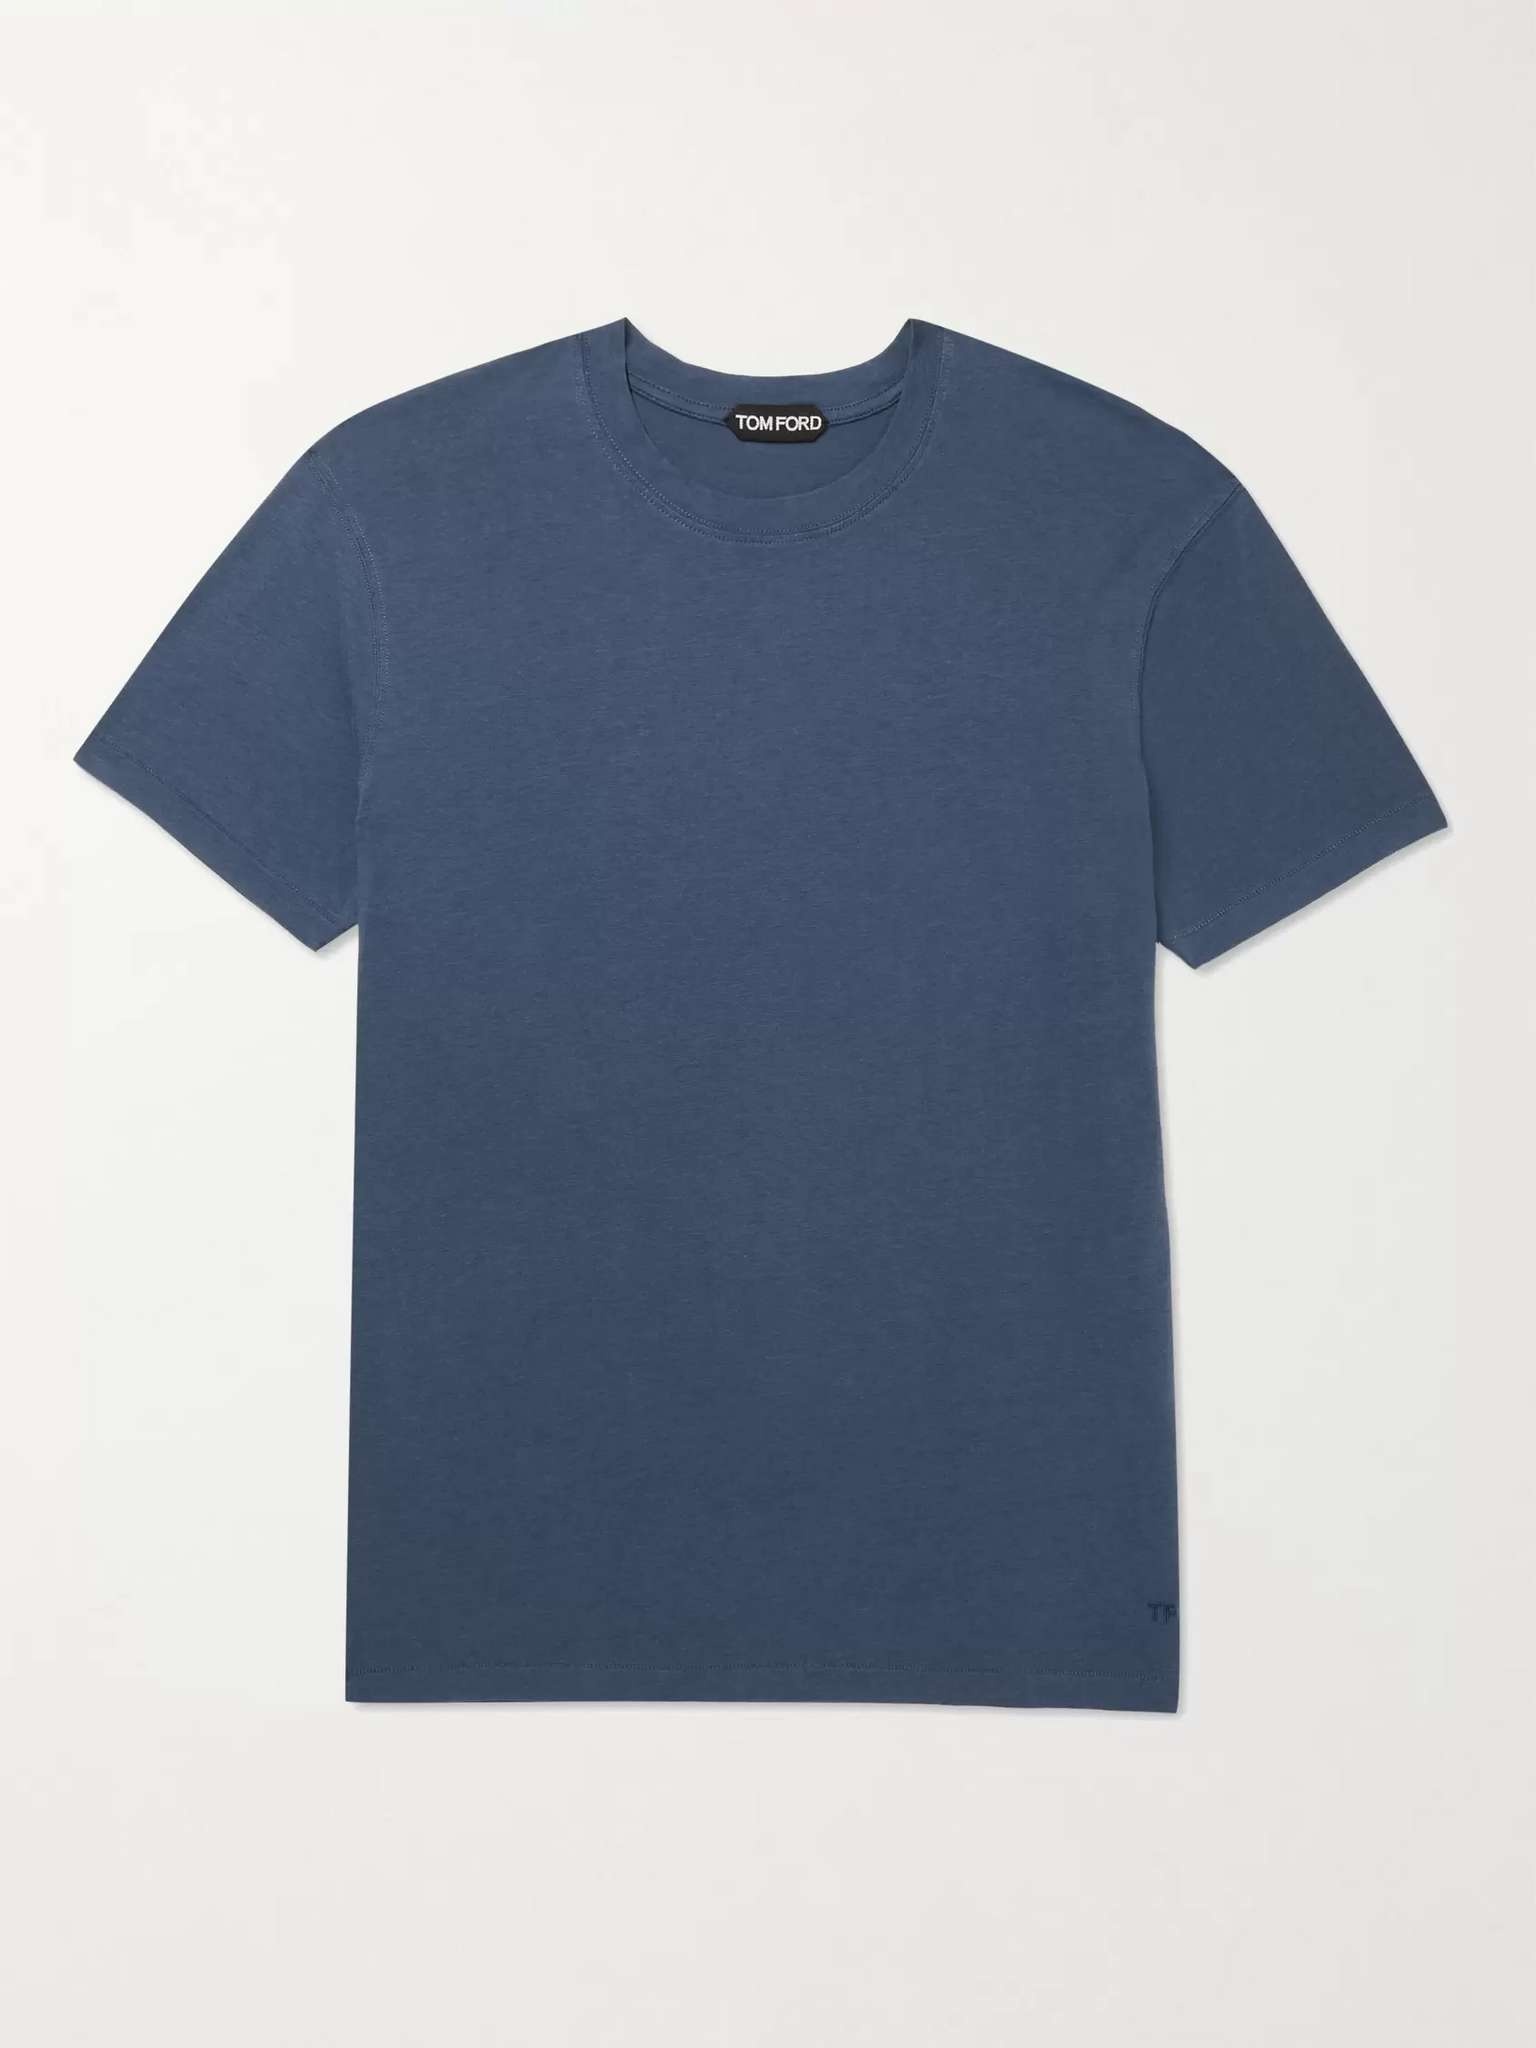 Tom Ford - logo-embroidered Jersey T-Shirt - Mens - Light Blue